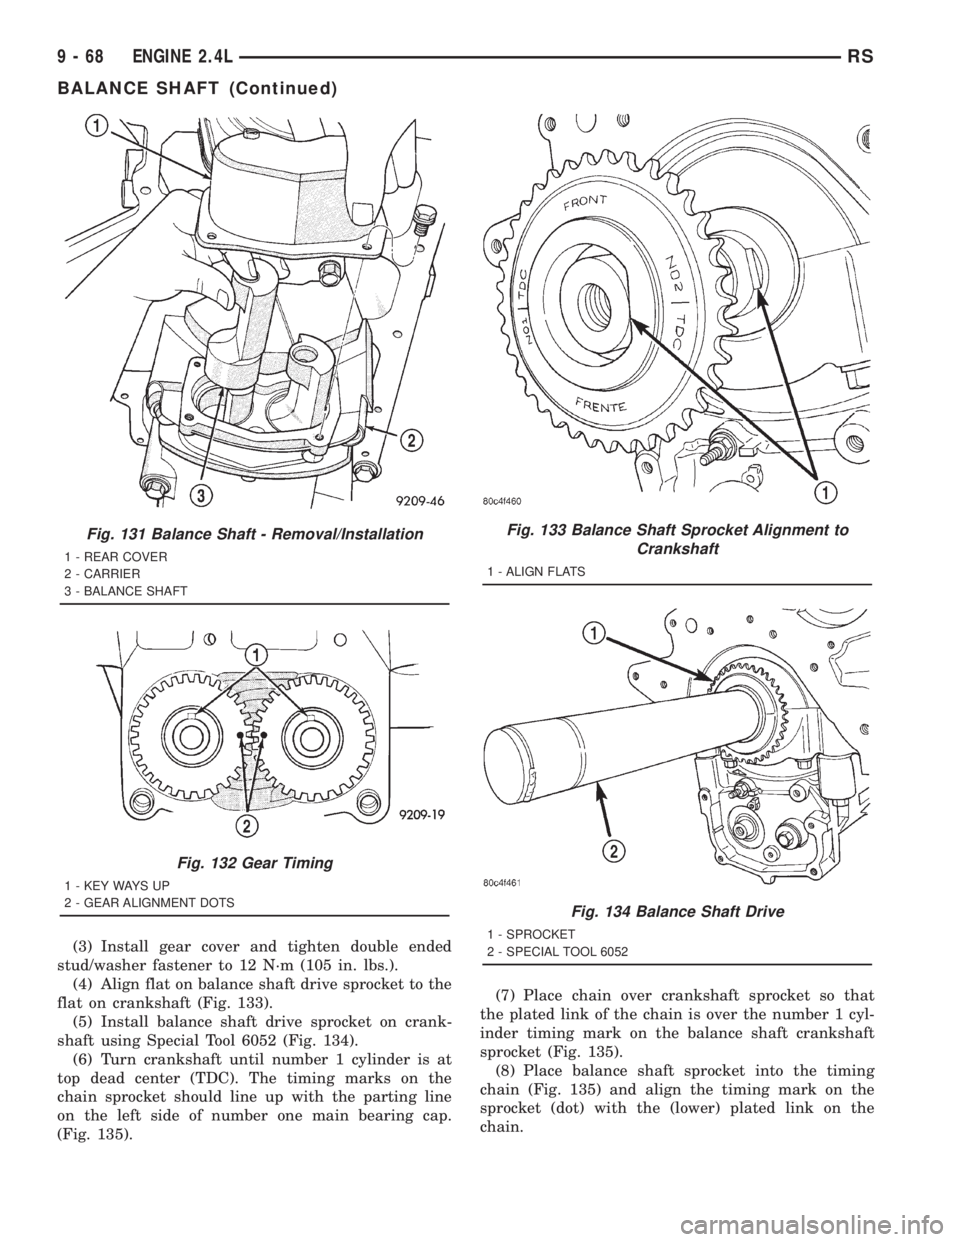 CHRYSLER VOYAGER 2001  Service Manual (3) Install gear cover and tighten double ended
stud/washer fastener to 12 N´m (105 in. lbs.).
(4) Align flat on balance shaft drive sprocket to the
flat on crankshaft (Fig. 133).
(5) Install balance